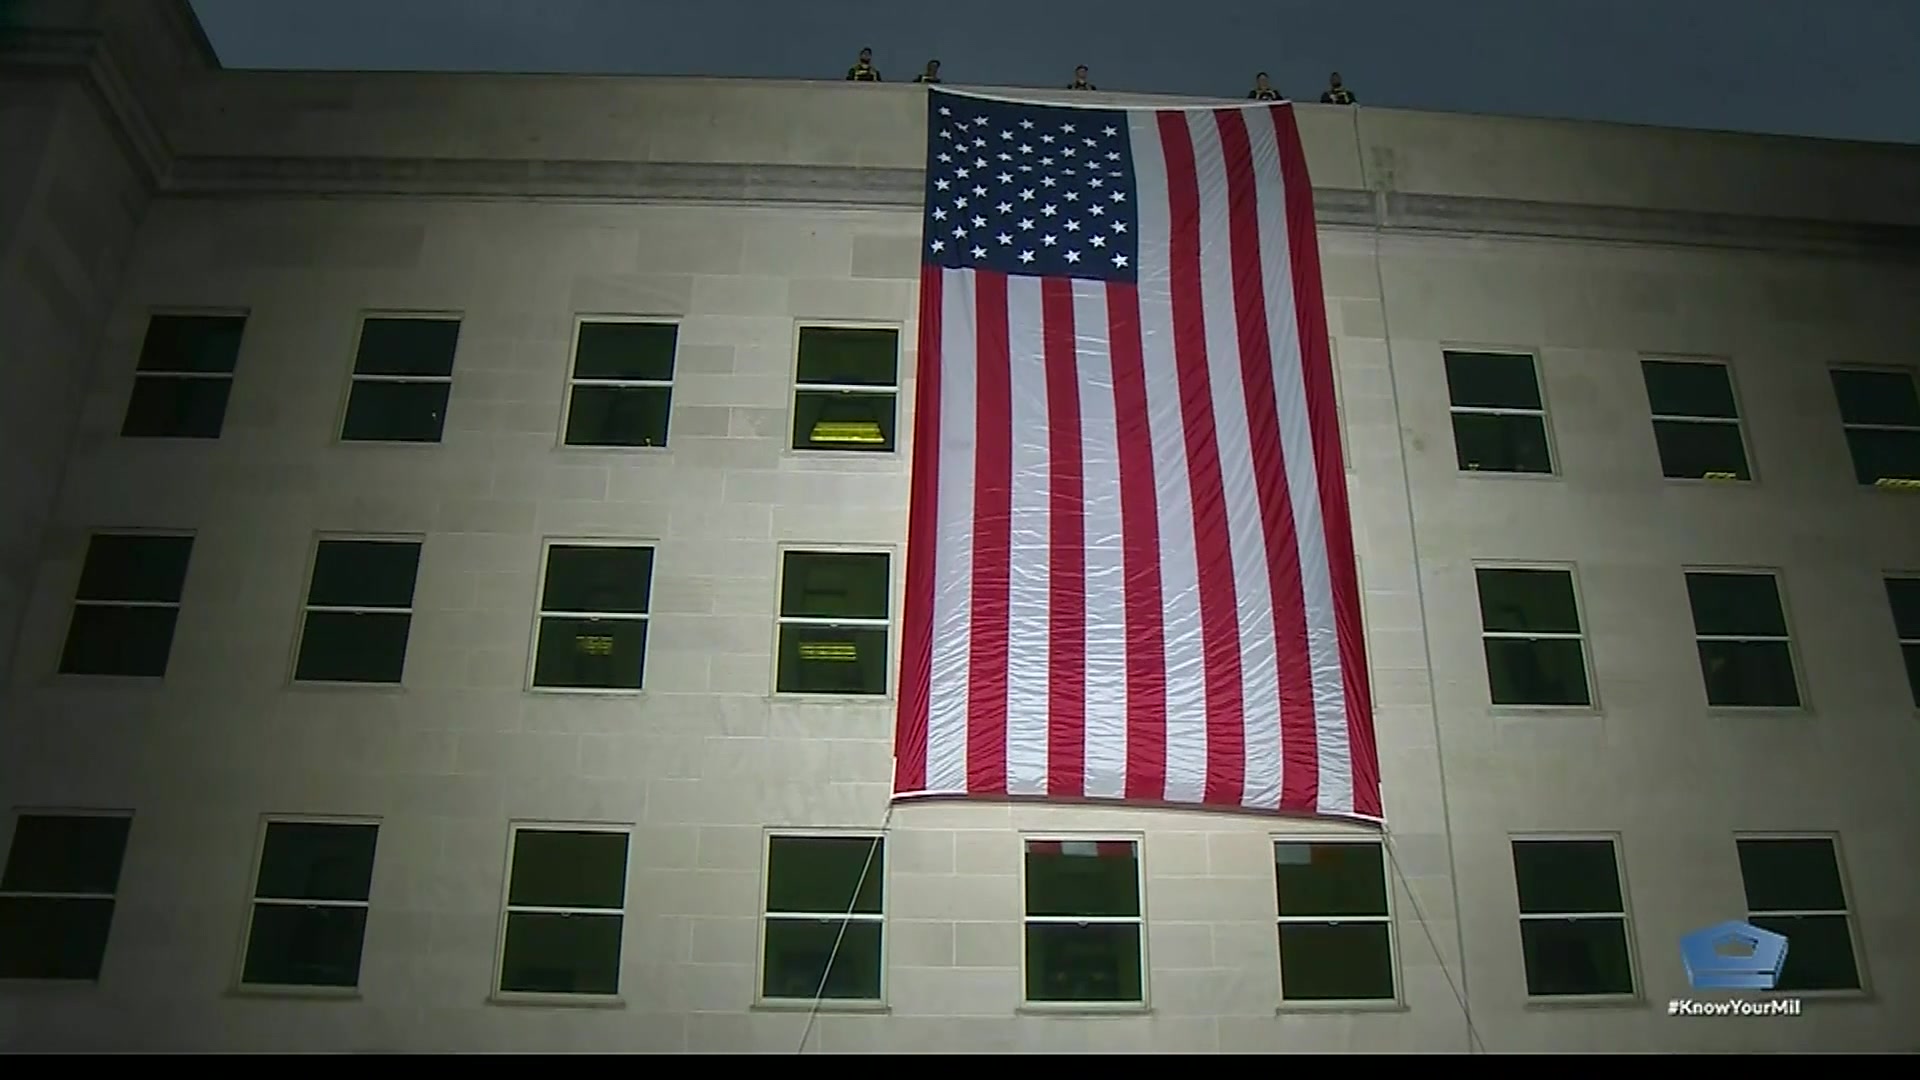 The U.S. flag is unfurled at sunrise on the west side of the Pentagon near the 9/11 Memorial in honor of those killed in the 9/11 terrorist attack, Sept. 11, 2019. The flag unfurling marks the anniversary and will be followed by both private and public ceremonies.